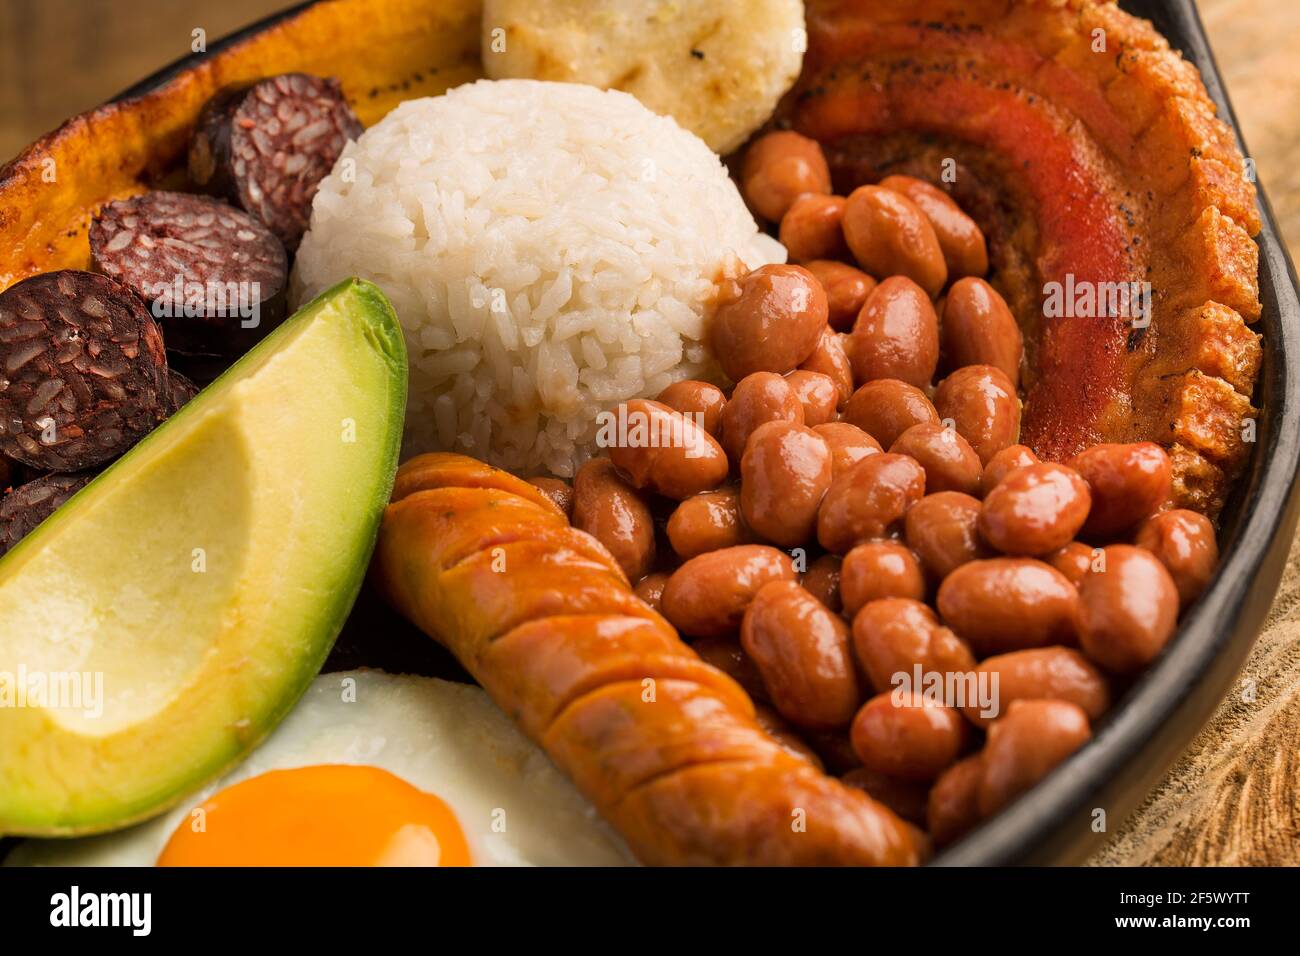 Bandeja paisa, typical dish at the Antioqueña region of Colombia. It consists of chicharrón (fried pork belly), black pudding, sausage, arepa, beans, Stock Photo